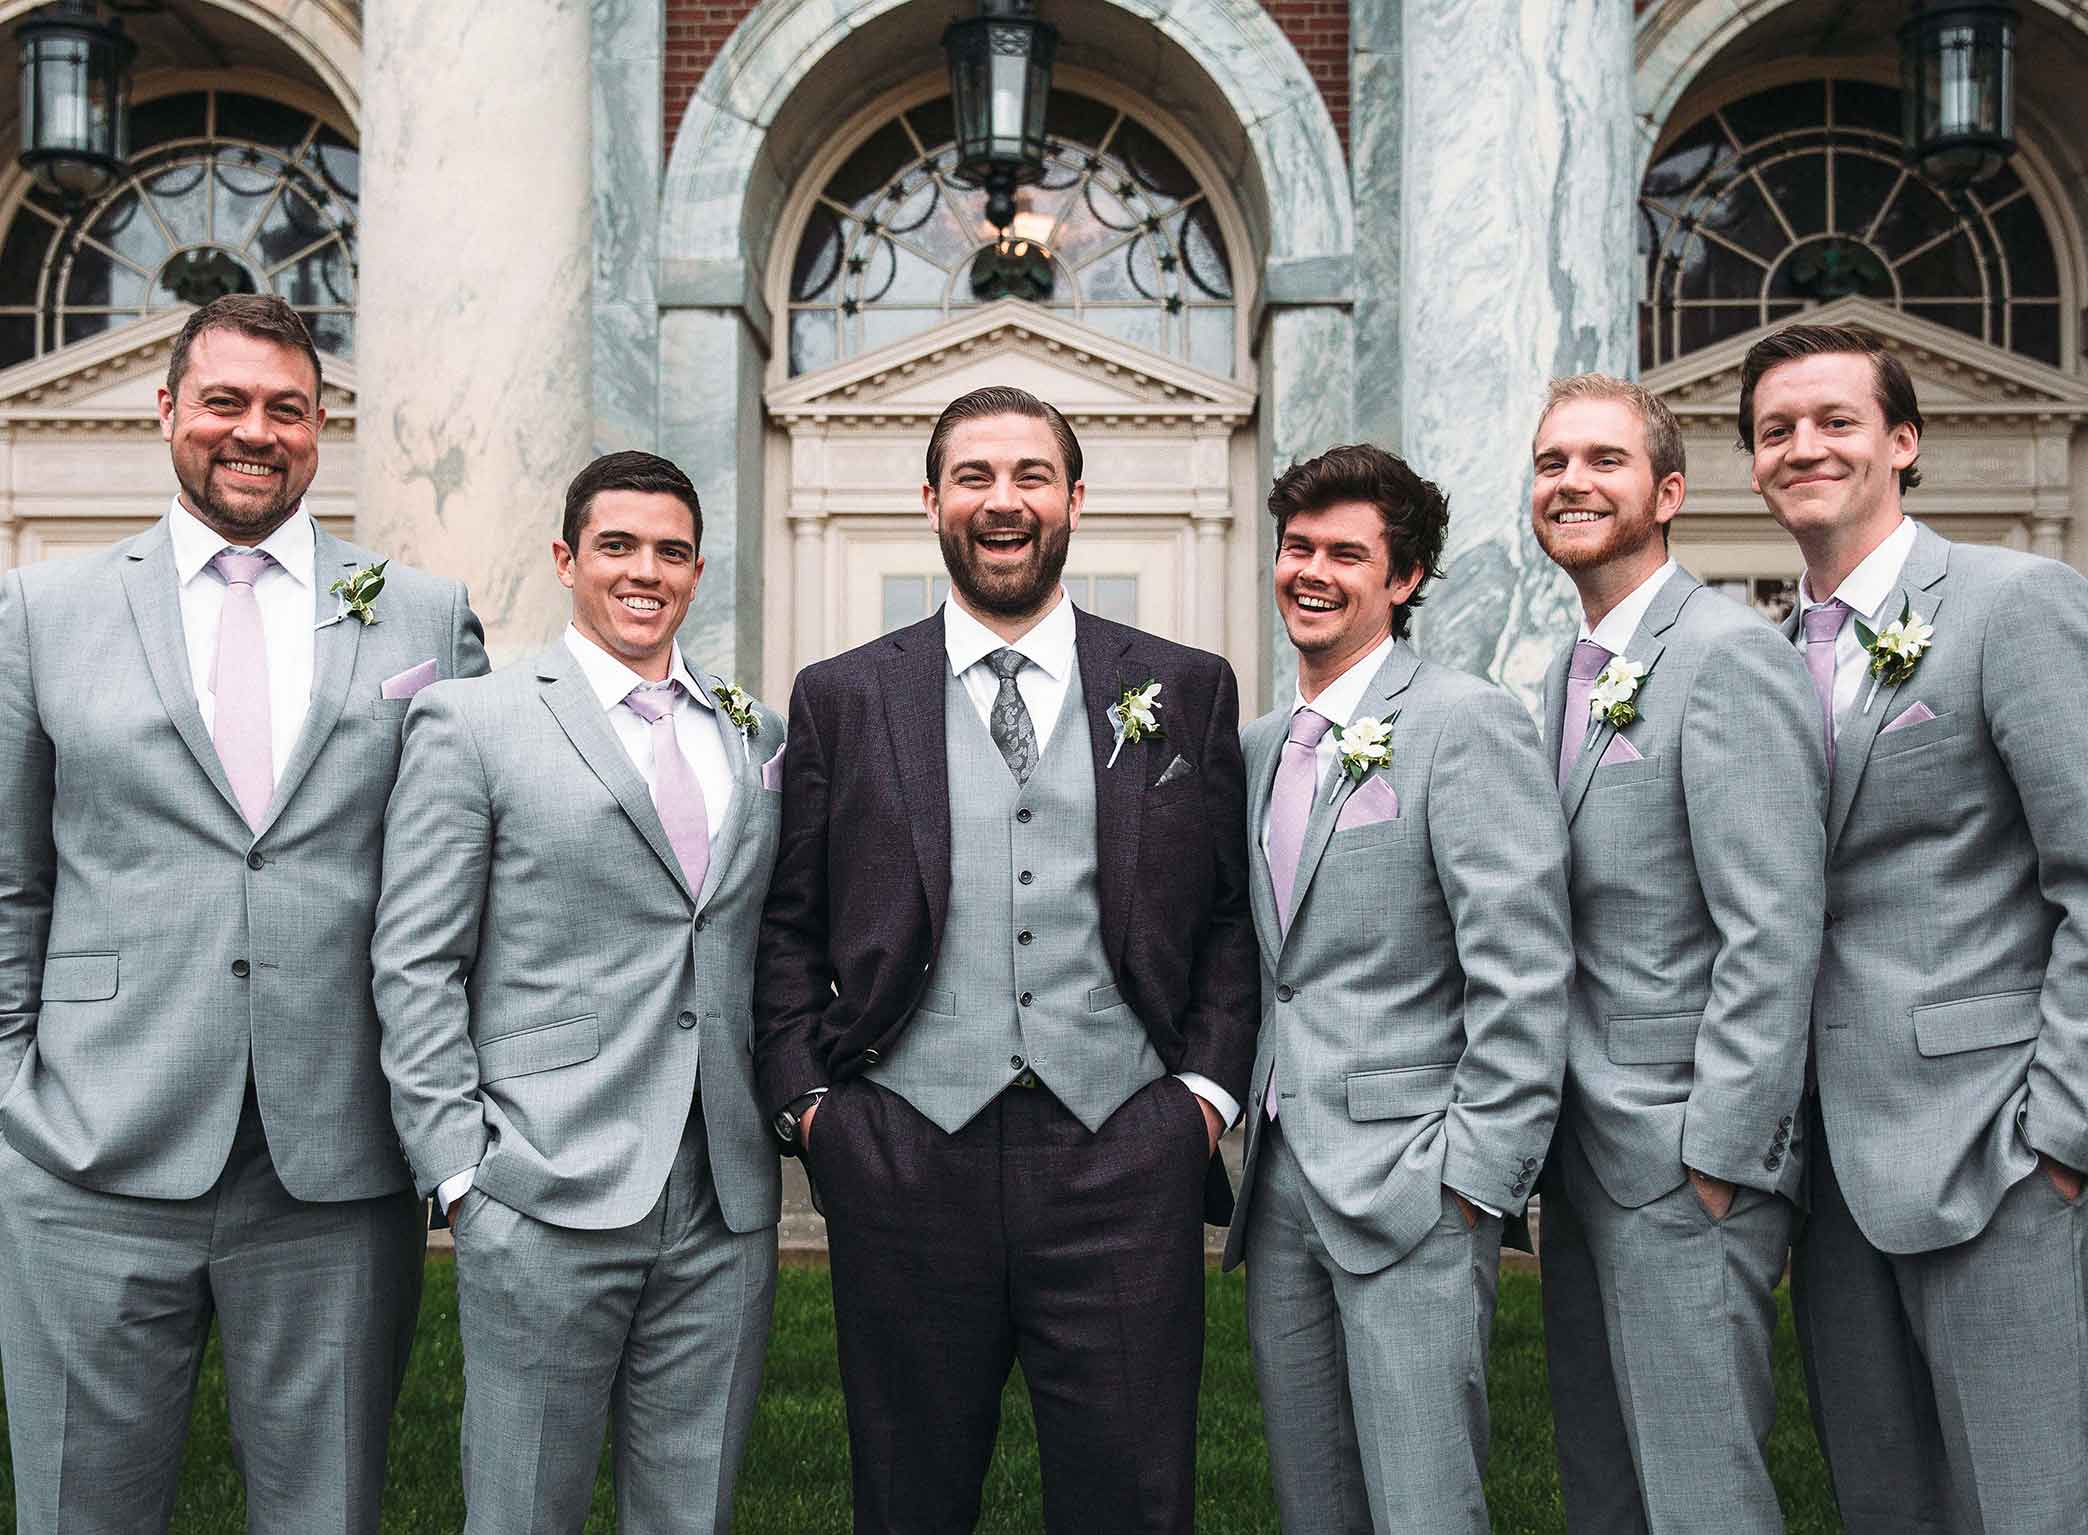 a groom and his groomsmen posing for a photo outside a building